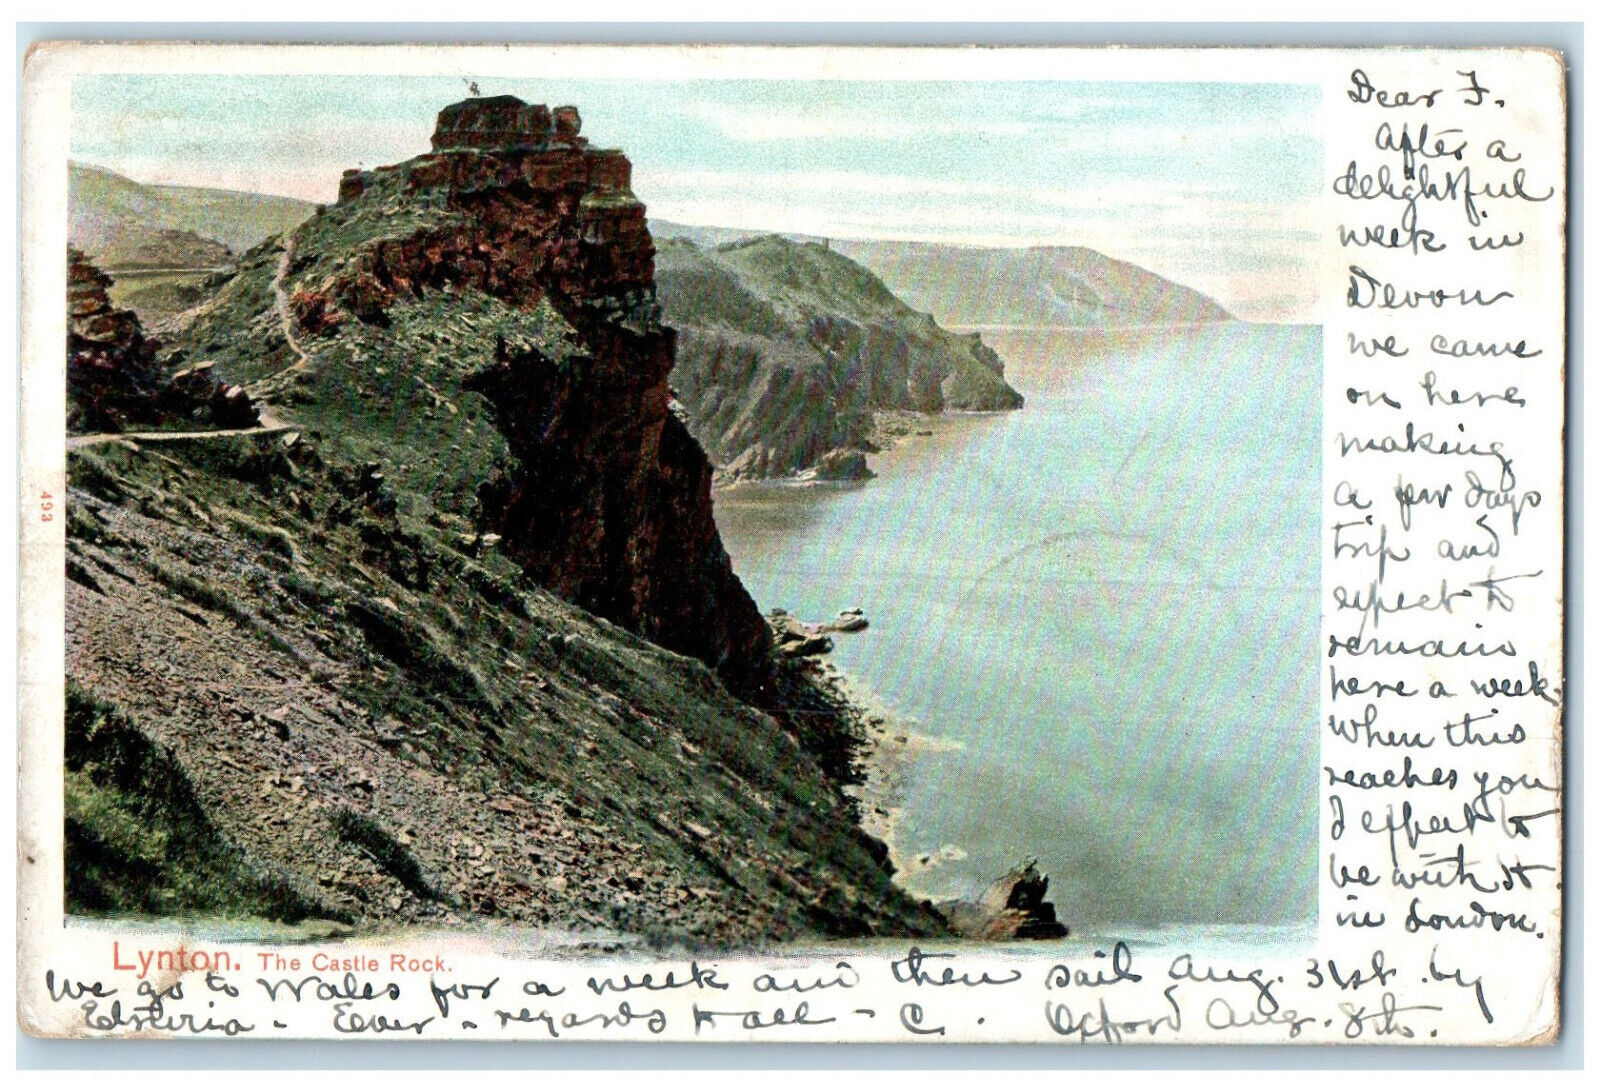 1907 View of The Castle Rock Lynton Devon England Antique Posted Postcard